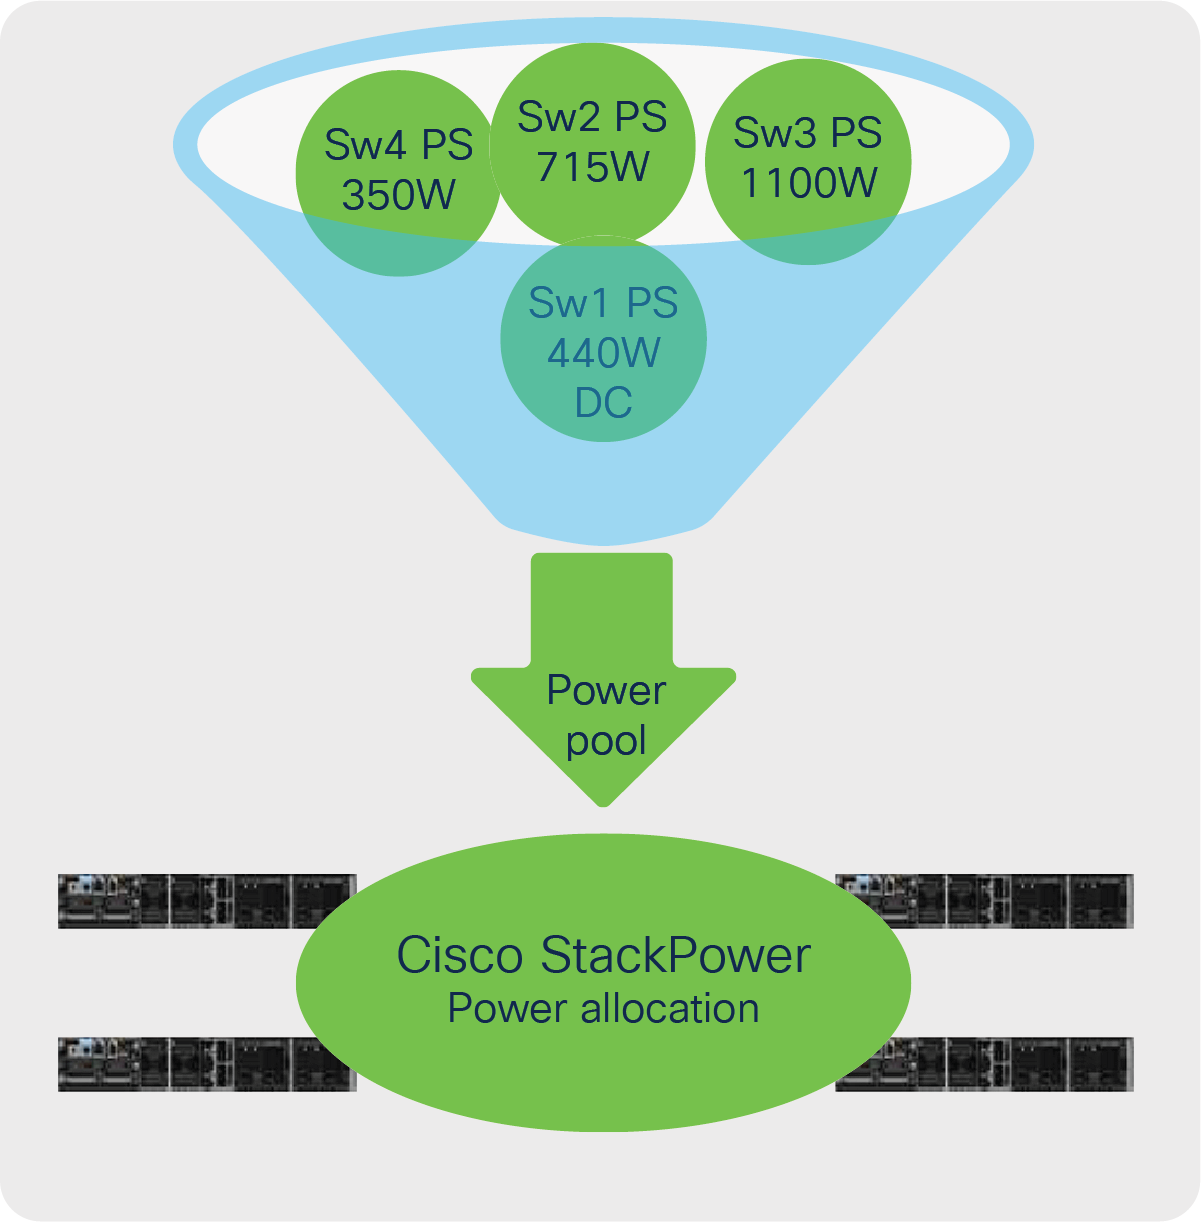 Cisco StackPower technology: One power pool, one load